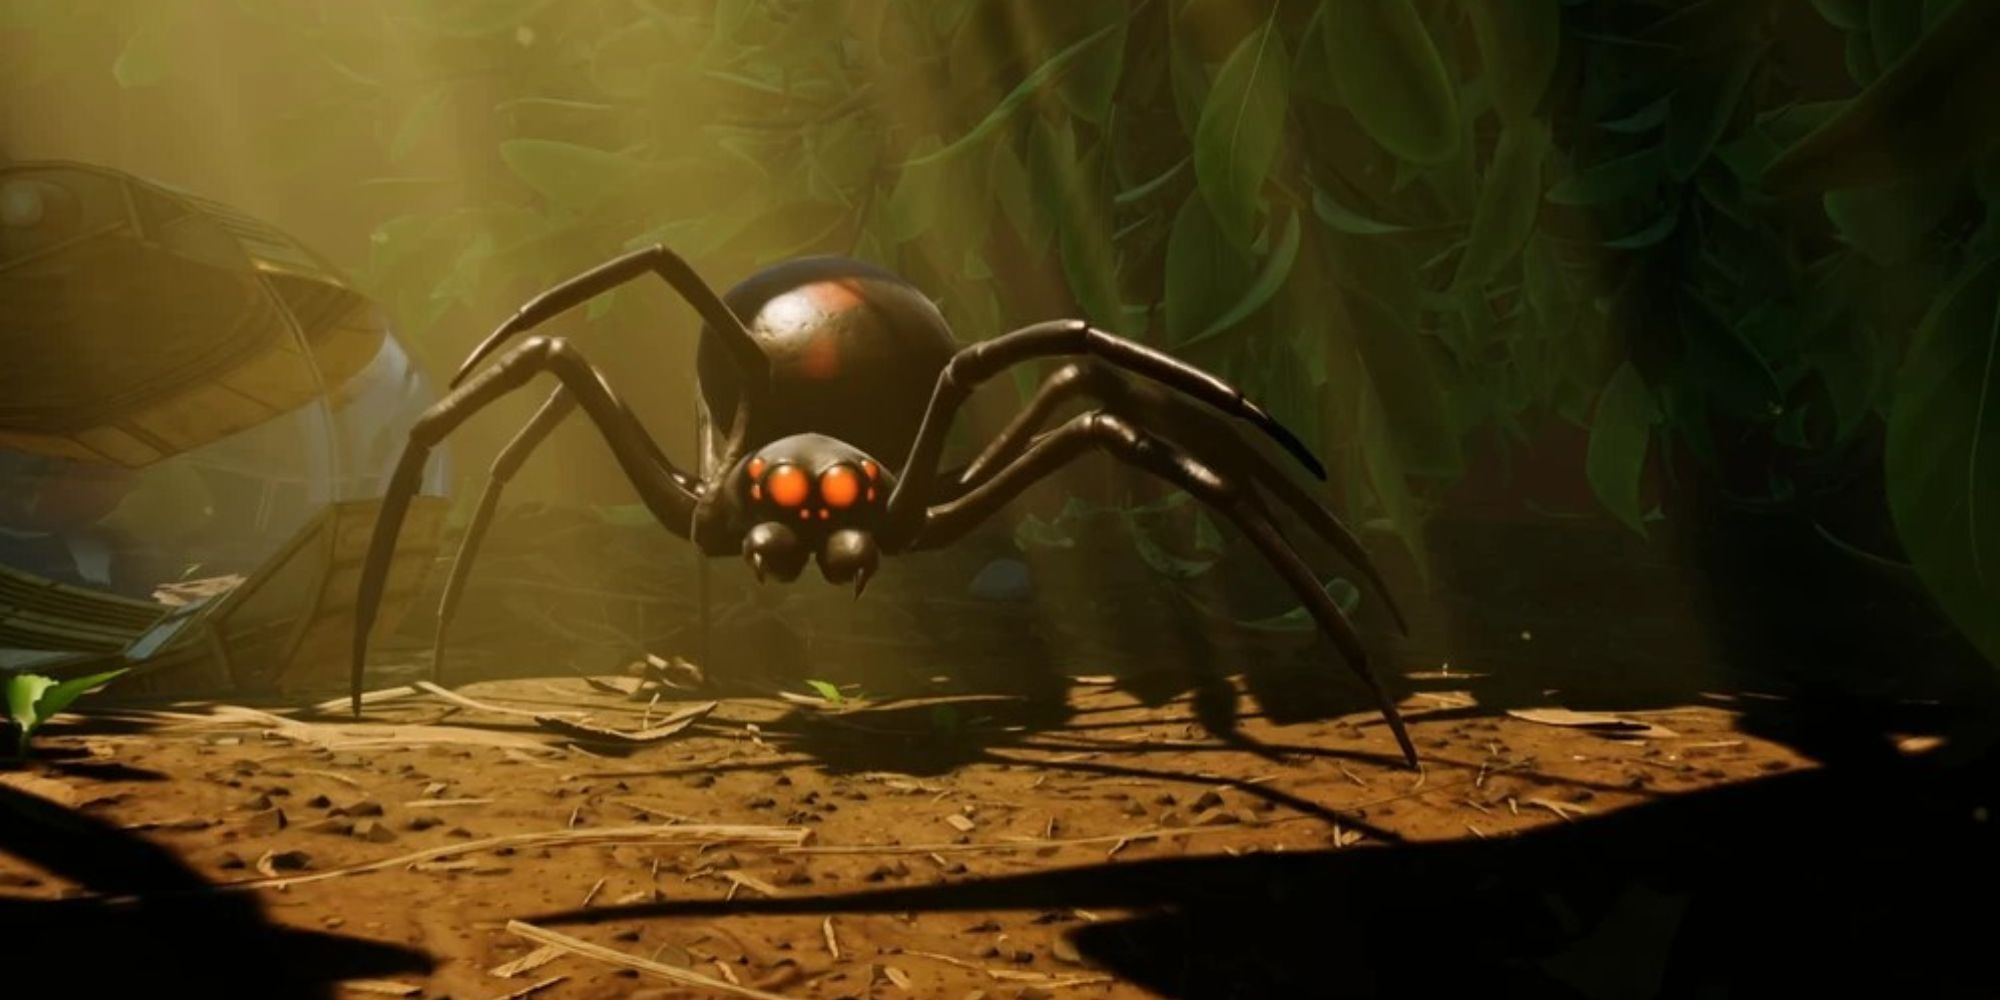 grounded spider armor